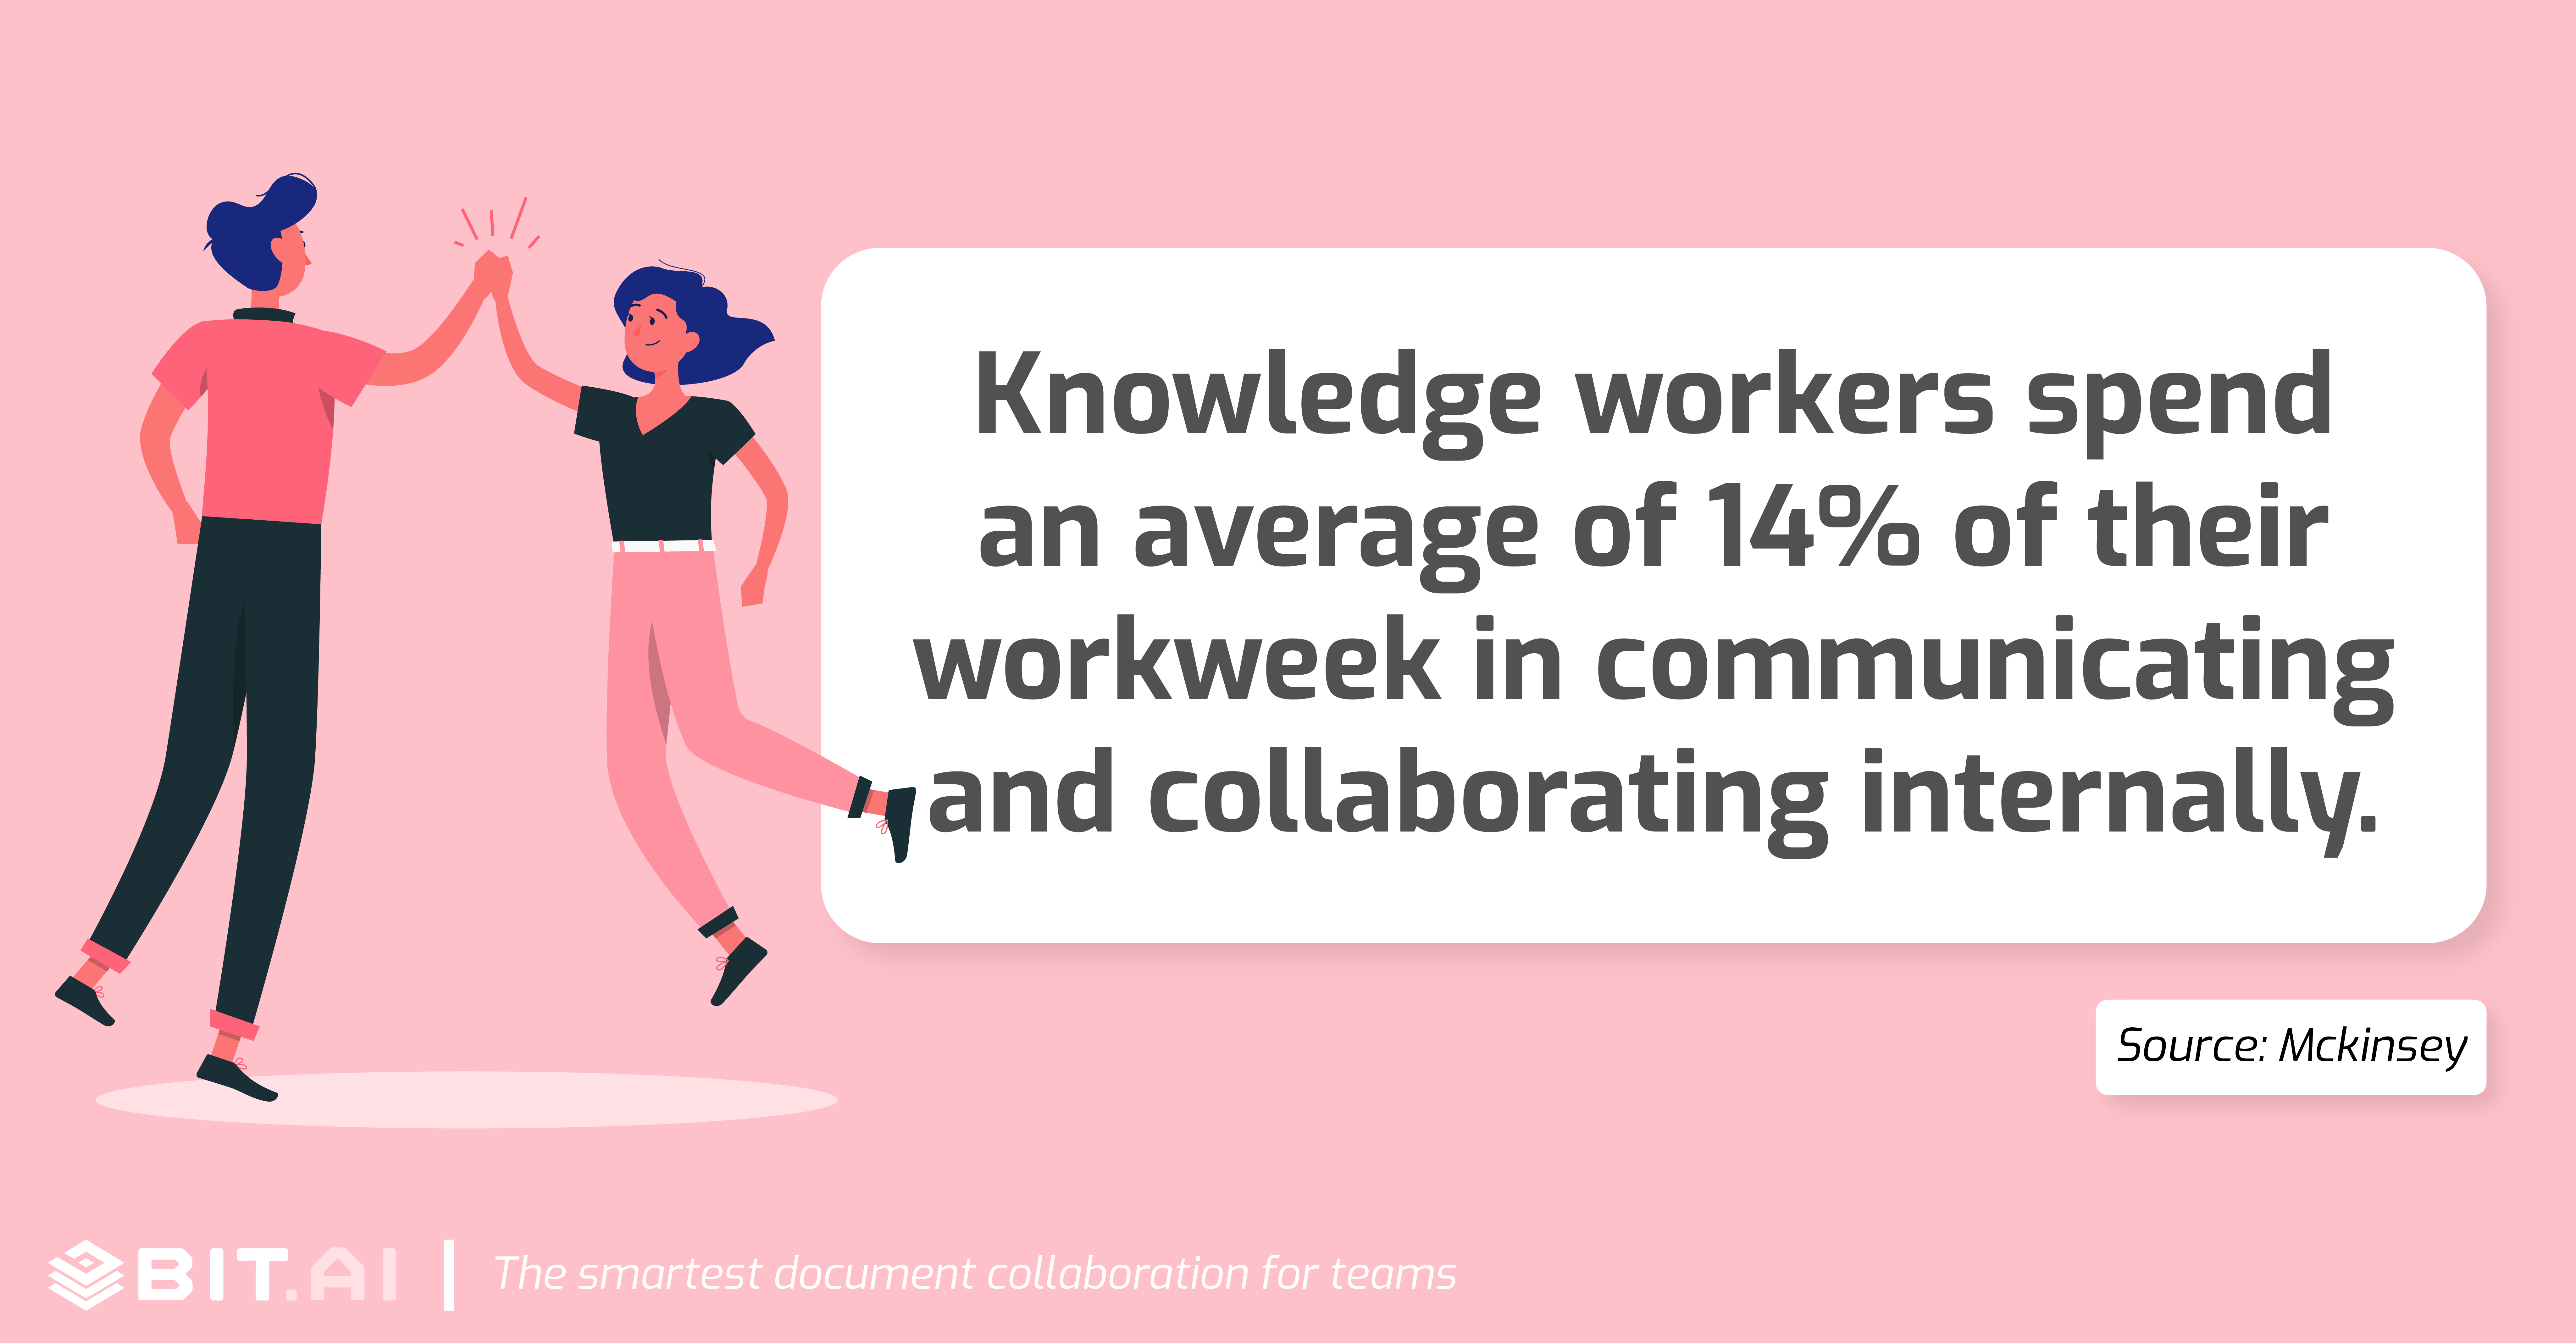 Statistic illustration: Knowledge workers spend an average of 14% of their work week communicating and collaborating internally.